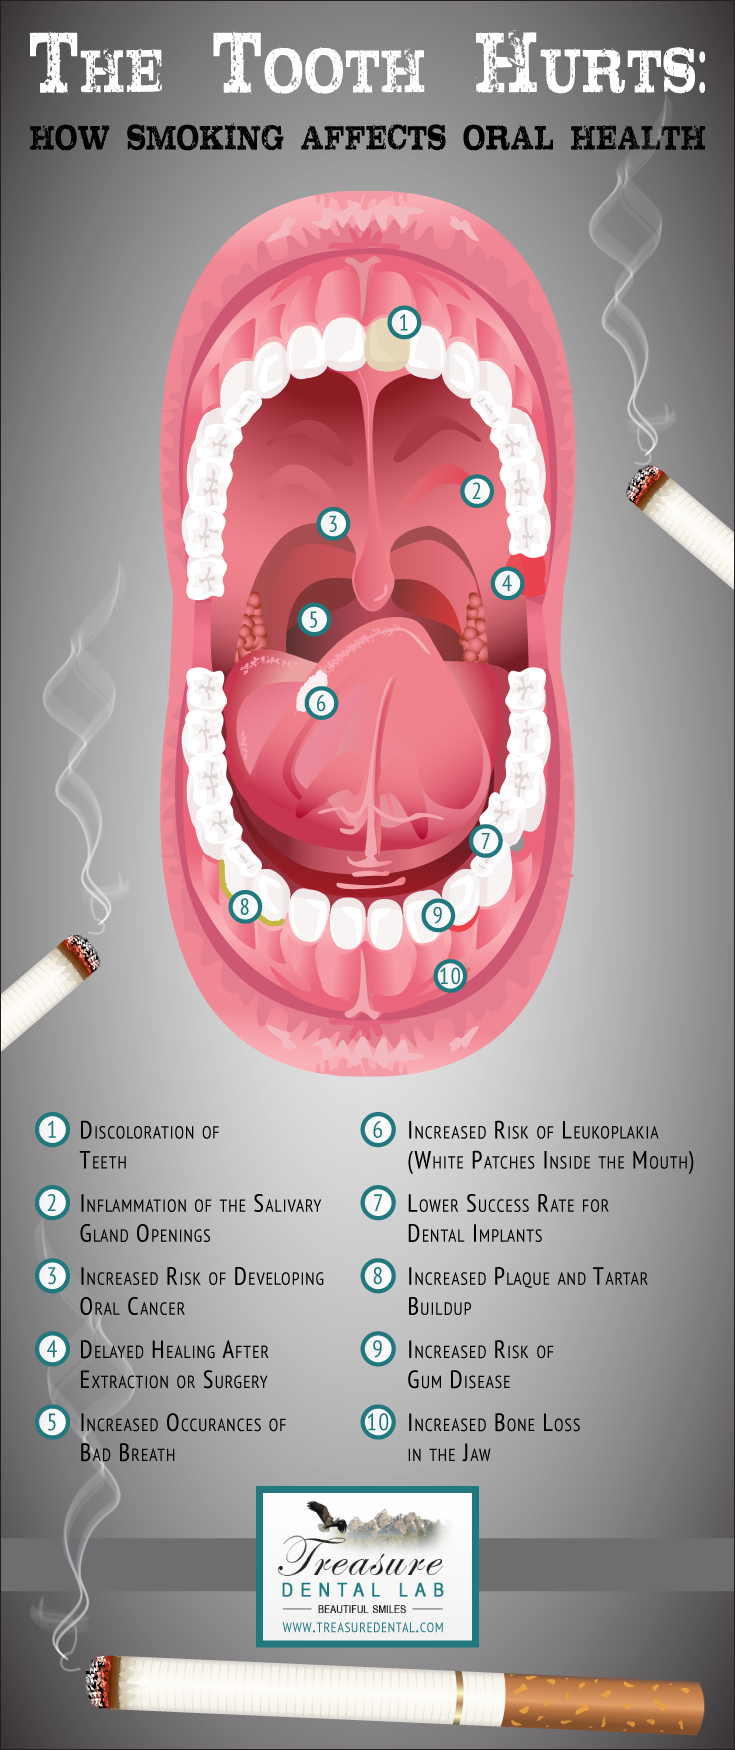 Affects of smoking on teeth